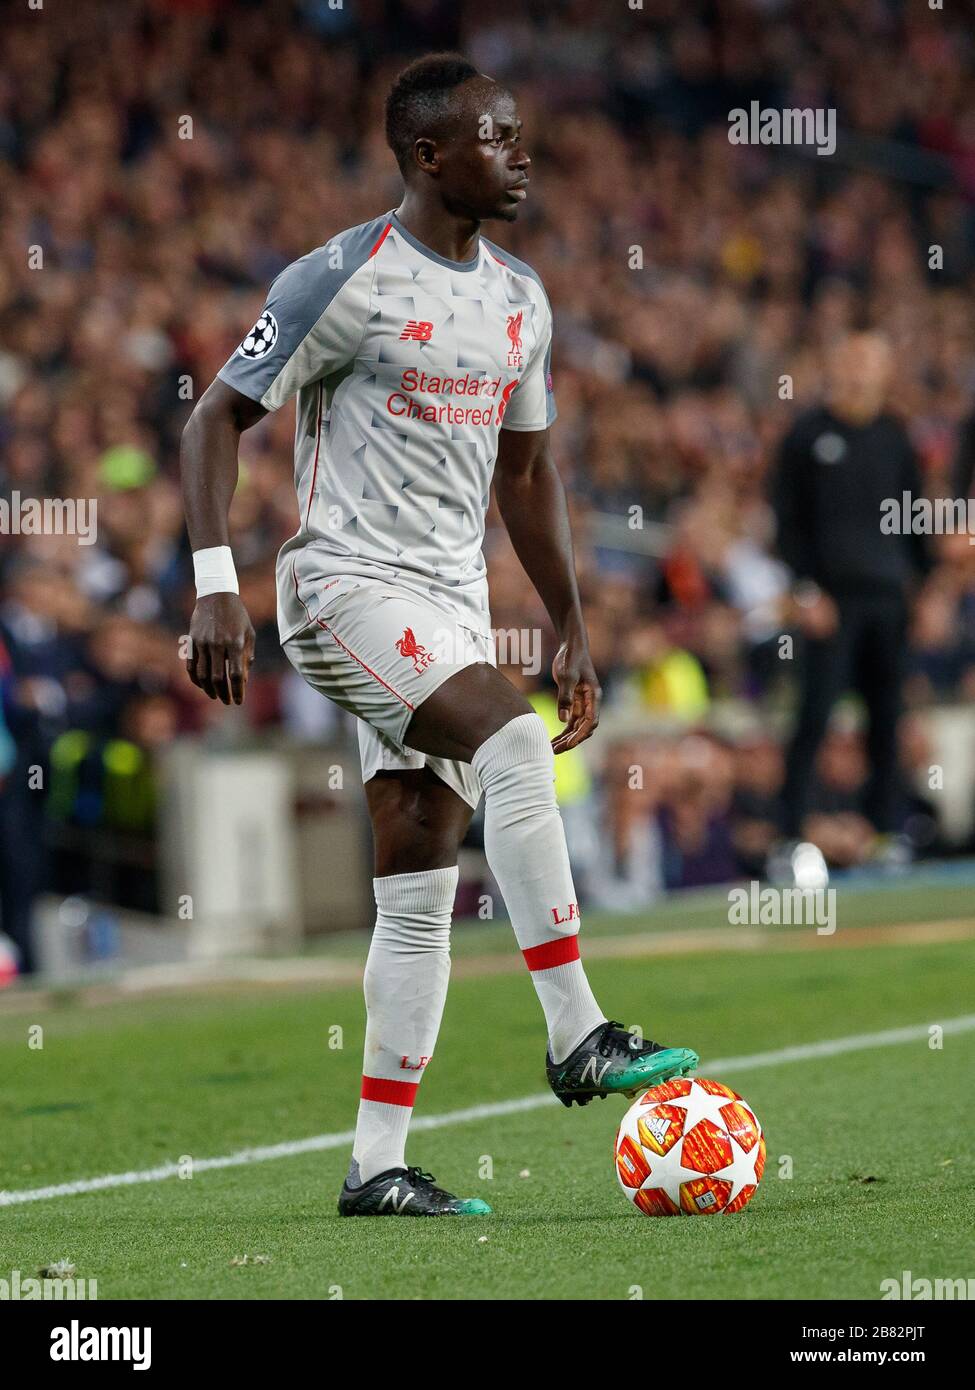 BARCELONA, SPAIN - MAY 01:  Sadio Mane of Liverpool during the UEFA Champions League Semi Final first leg match between FC Barcelona and Liverpool at Stock Photo